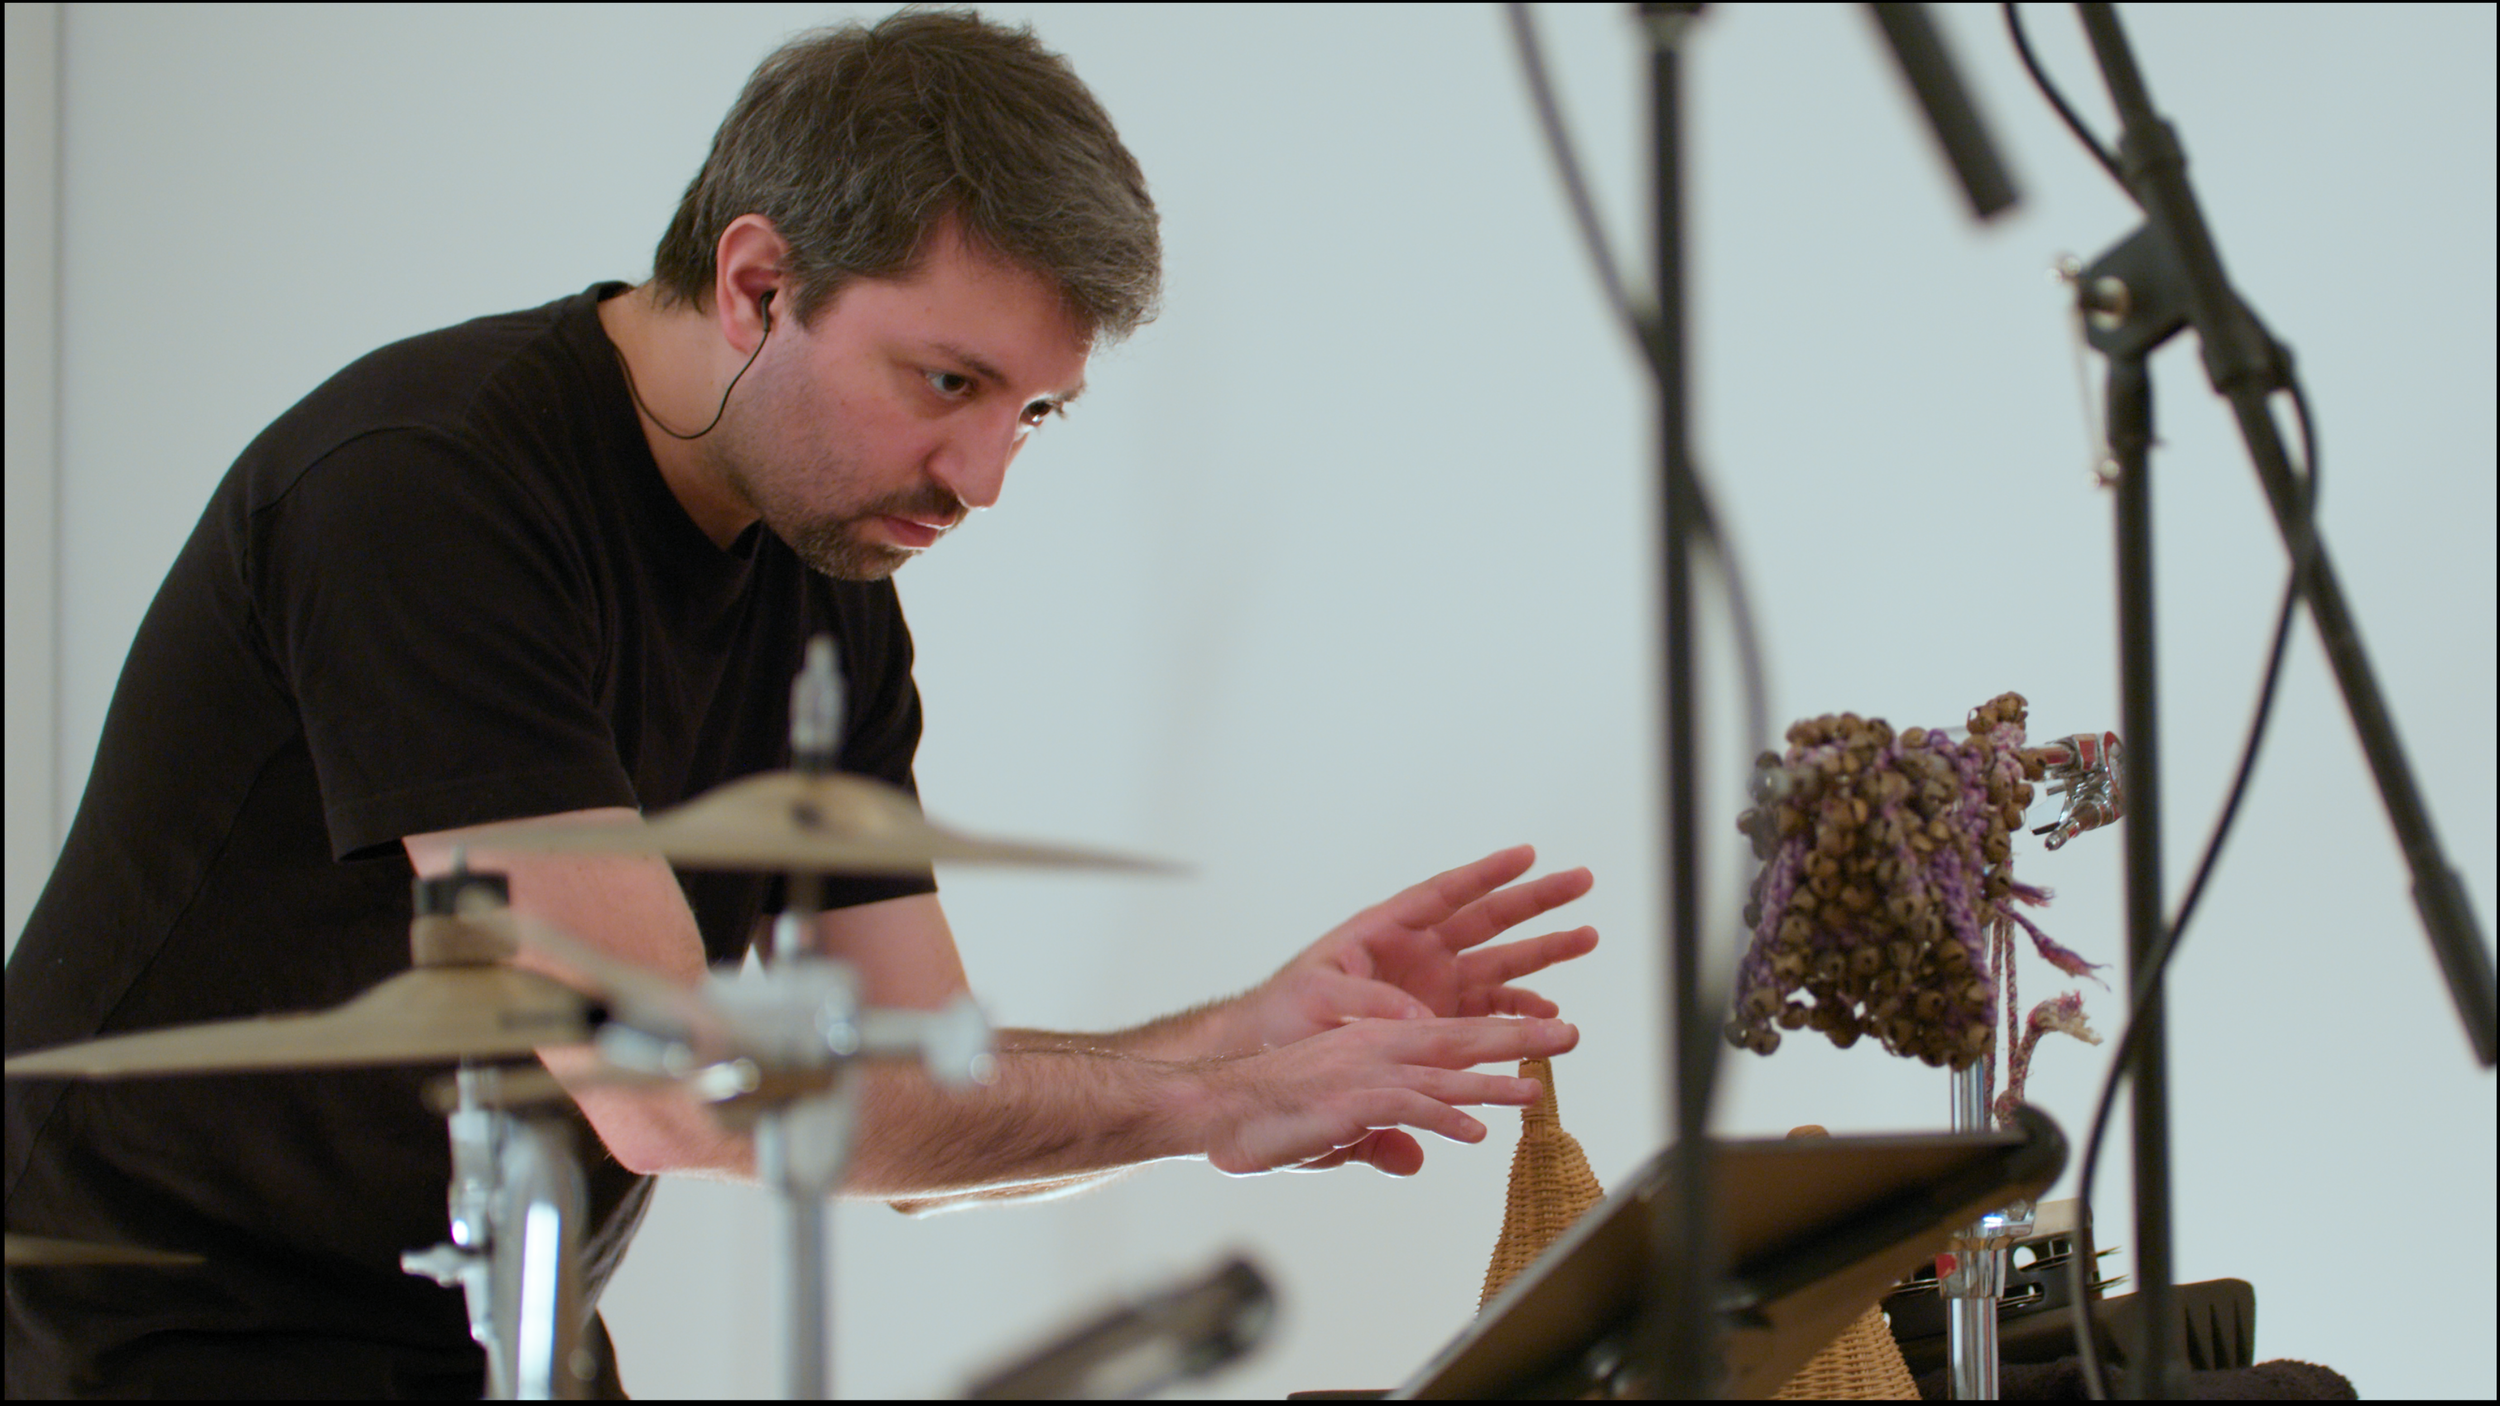 2. A close-up image of a percussionist playing a caxixi with their fingertips. The caxixi is a brown, shaker-like instrument, and is placed on a foam pad.